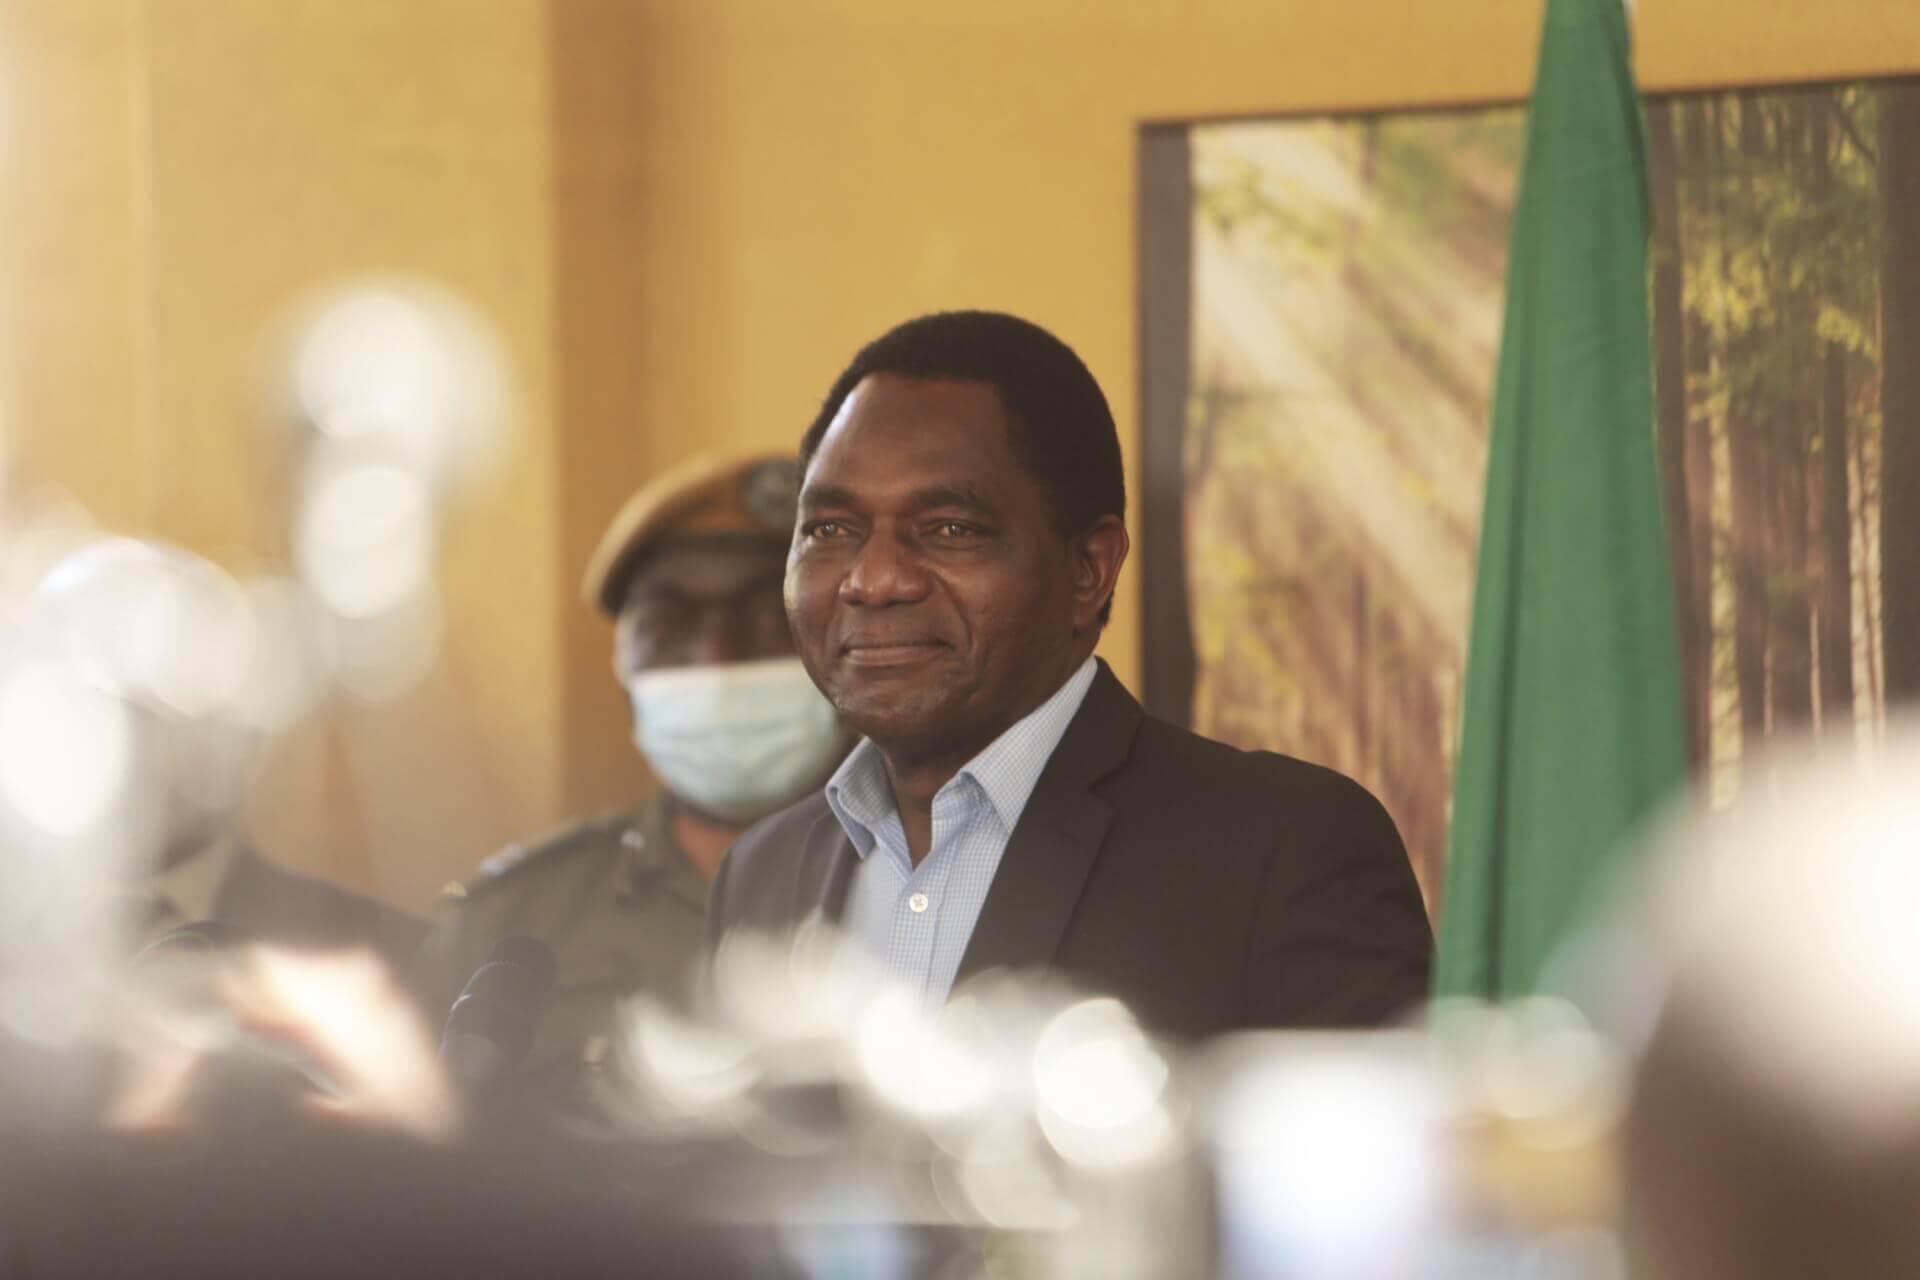 Zambian Opposition Leader Hichilema Secures Surprise Landslide Victory, Defeating Lungu